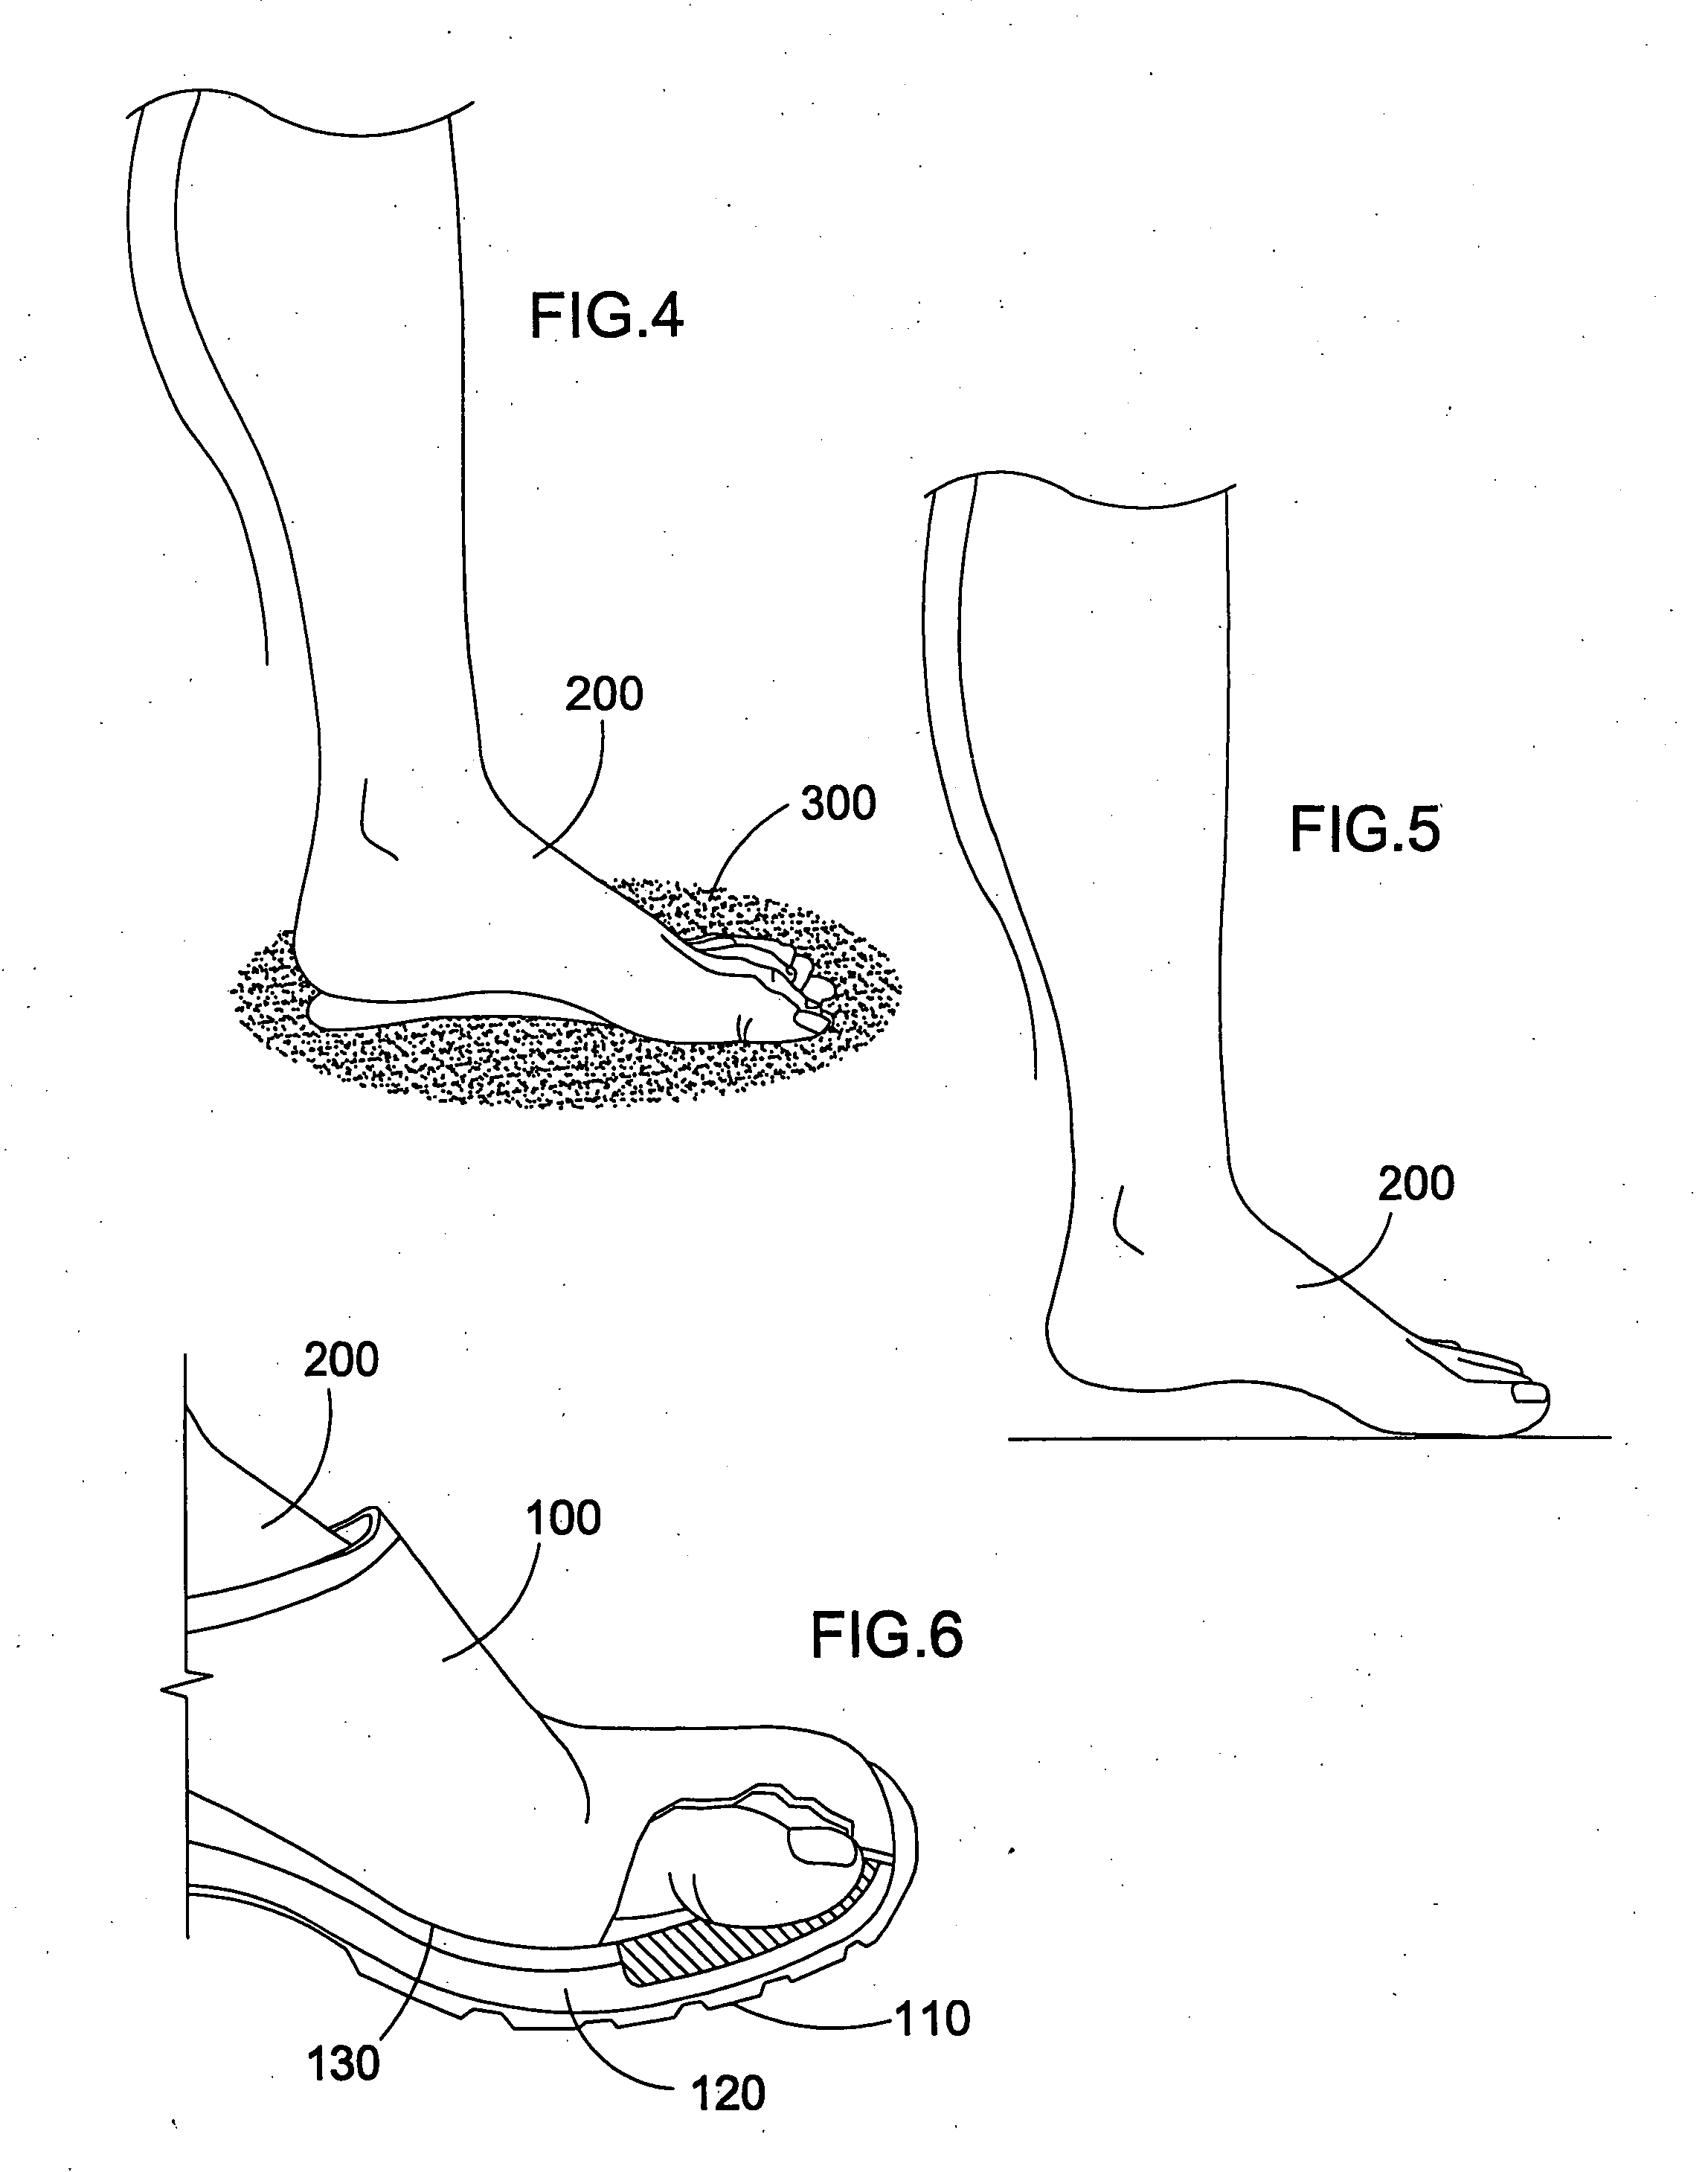 Shoe sole to improve walking, sensory response of the toes, and help develop leg muscles